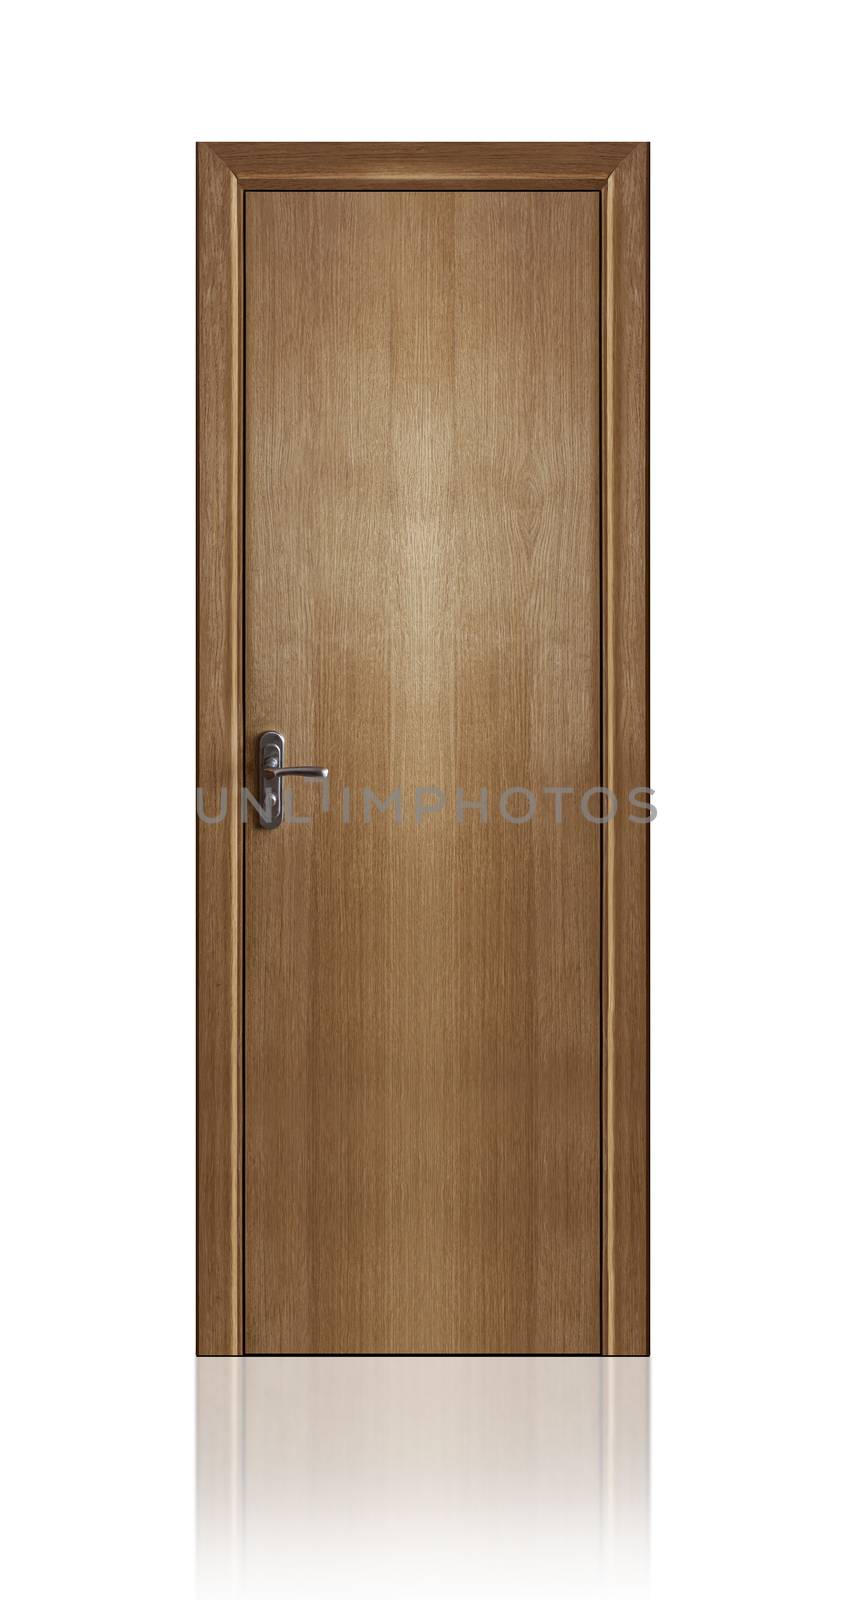 Close up of closed wooden door isolated on white background